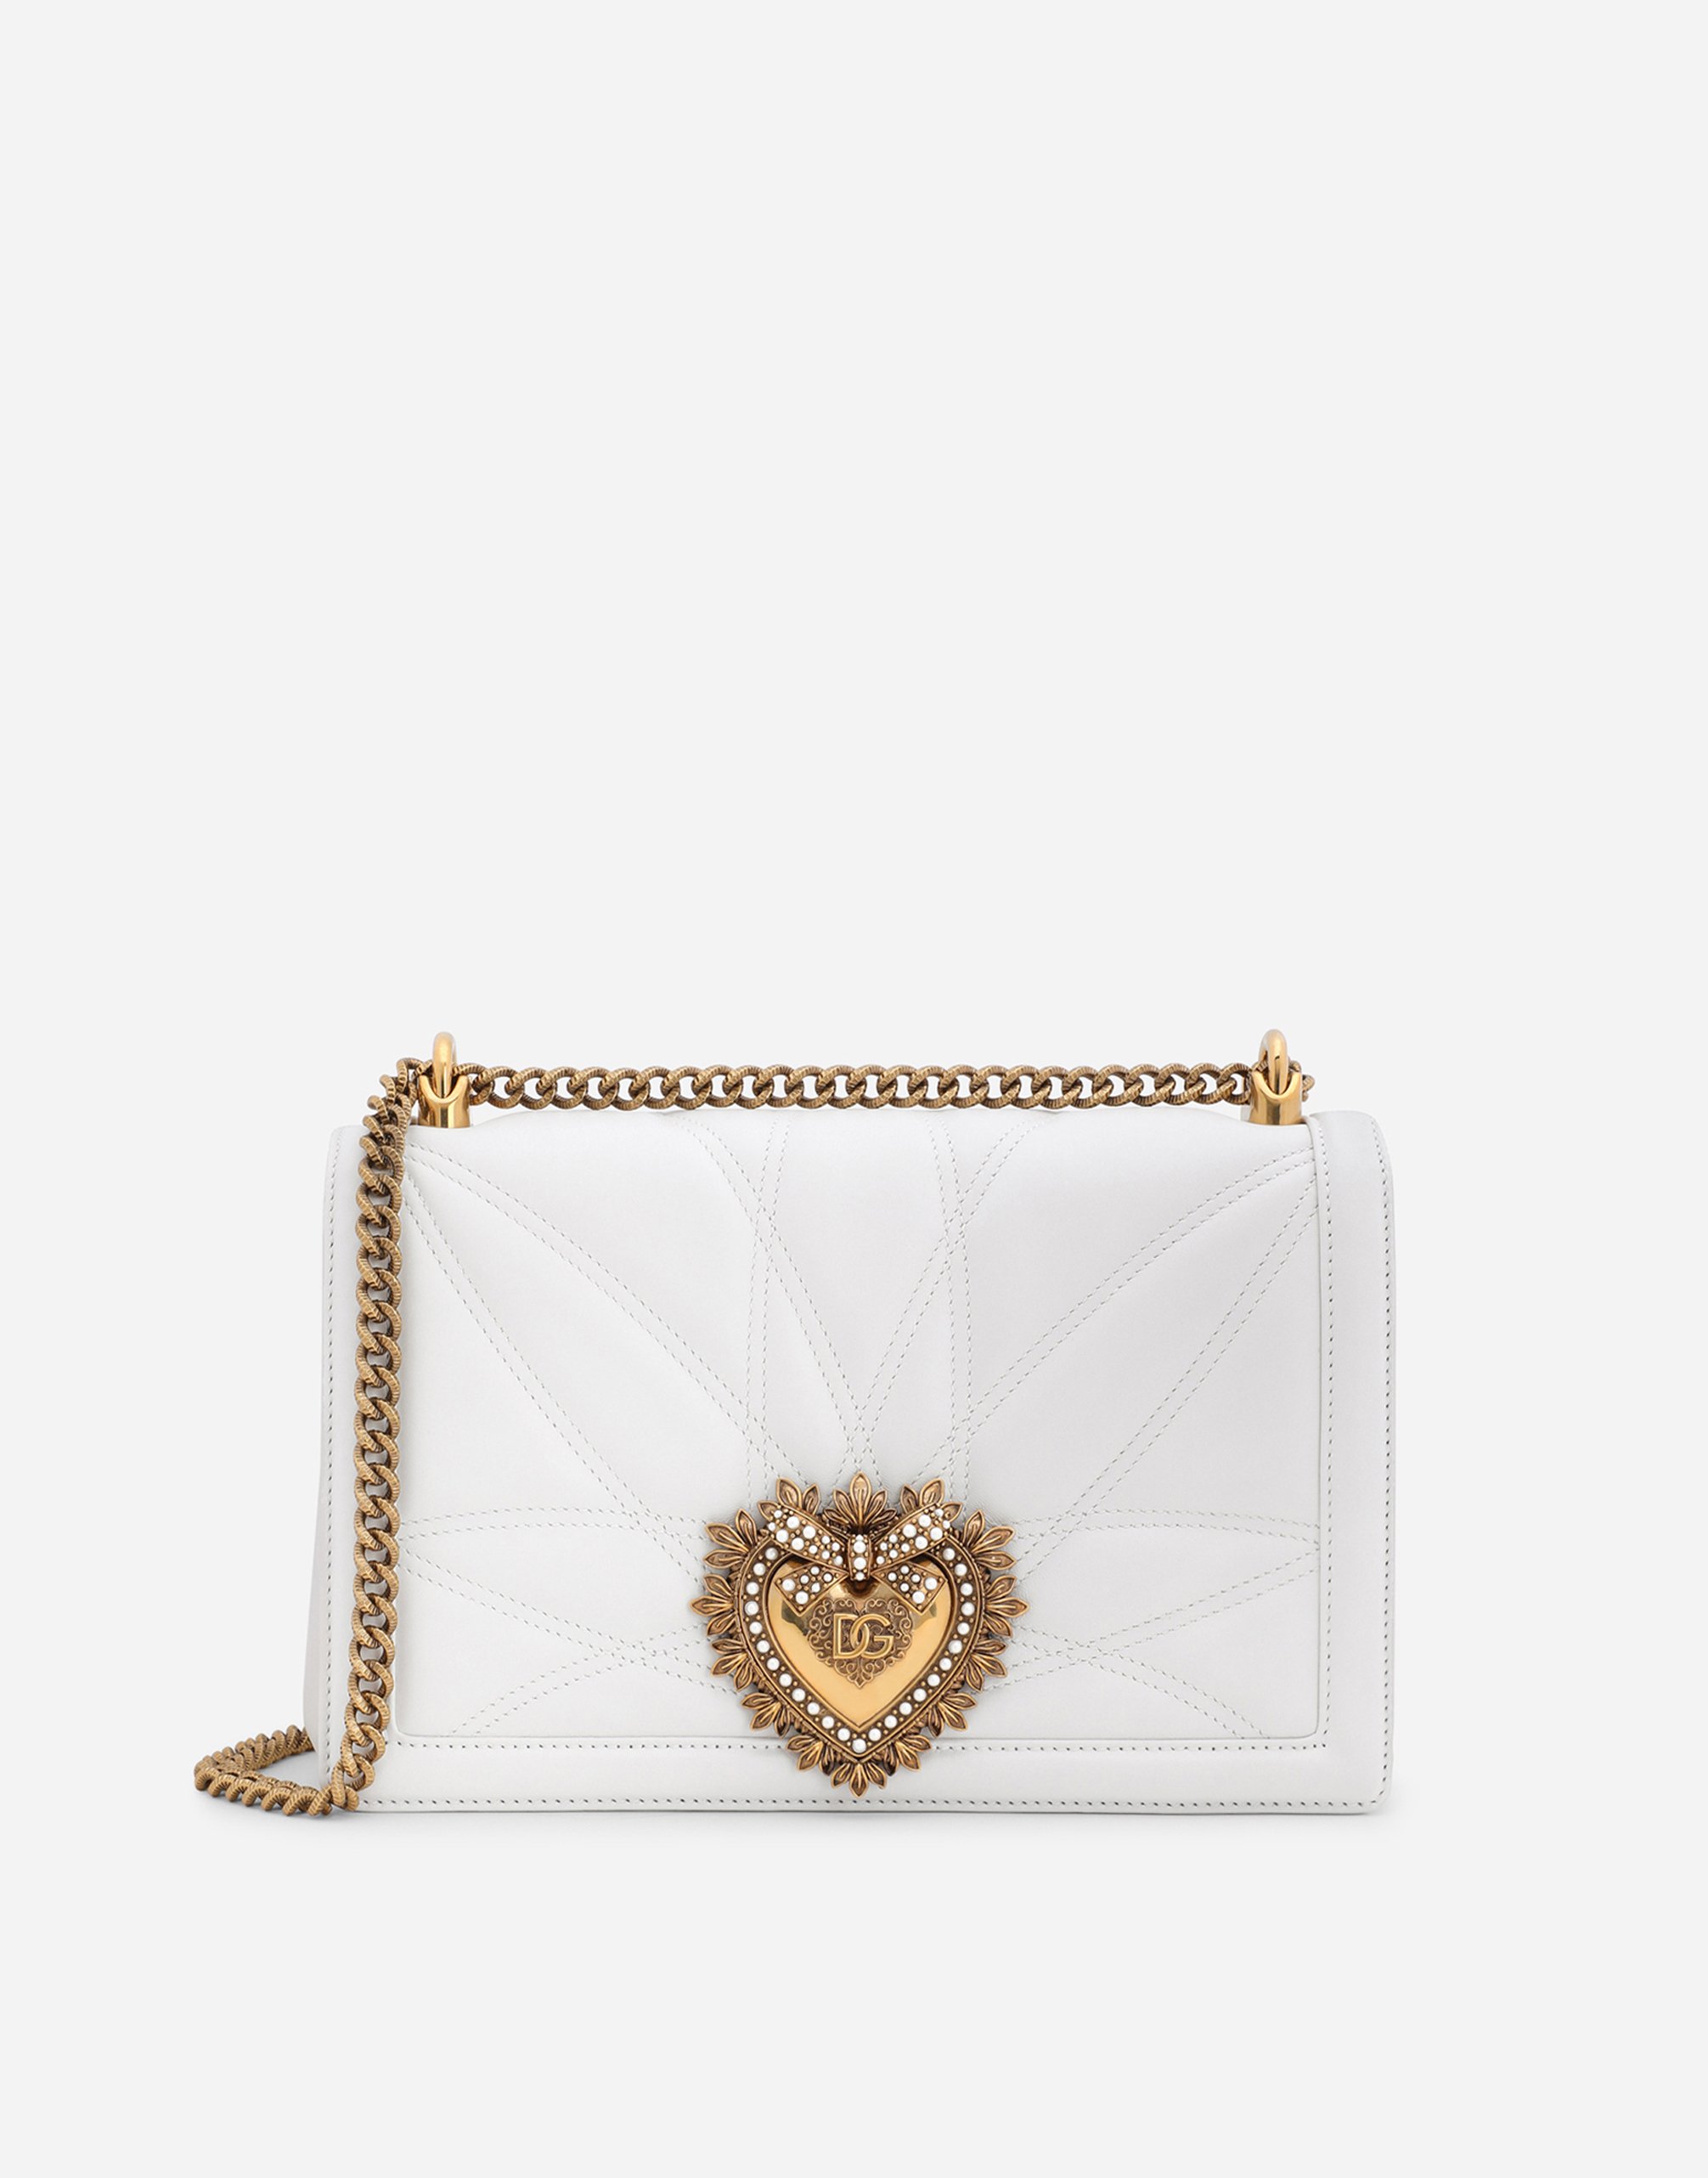 Dolce & Gabbana Large Devotion Bag In Quilted Nappa Leather In White